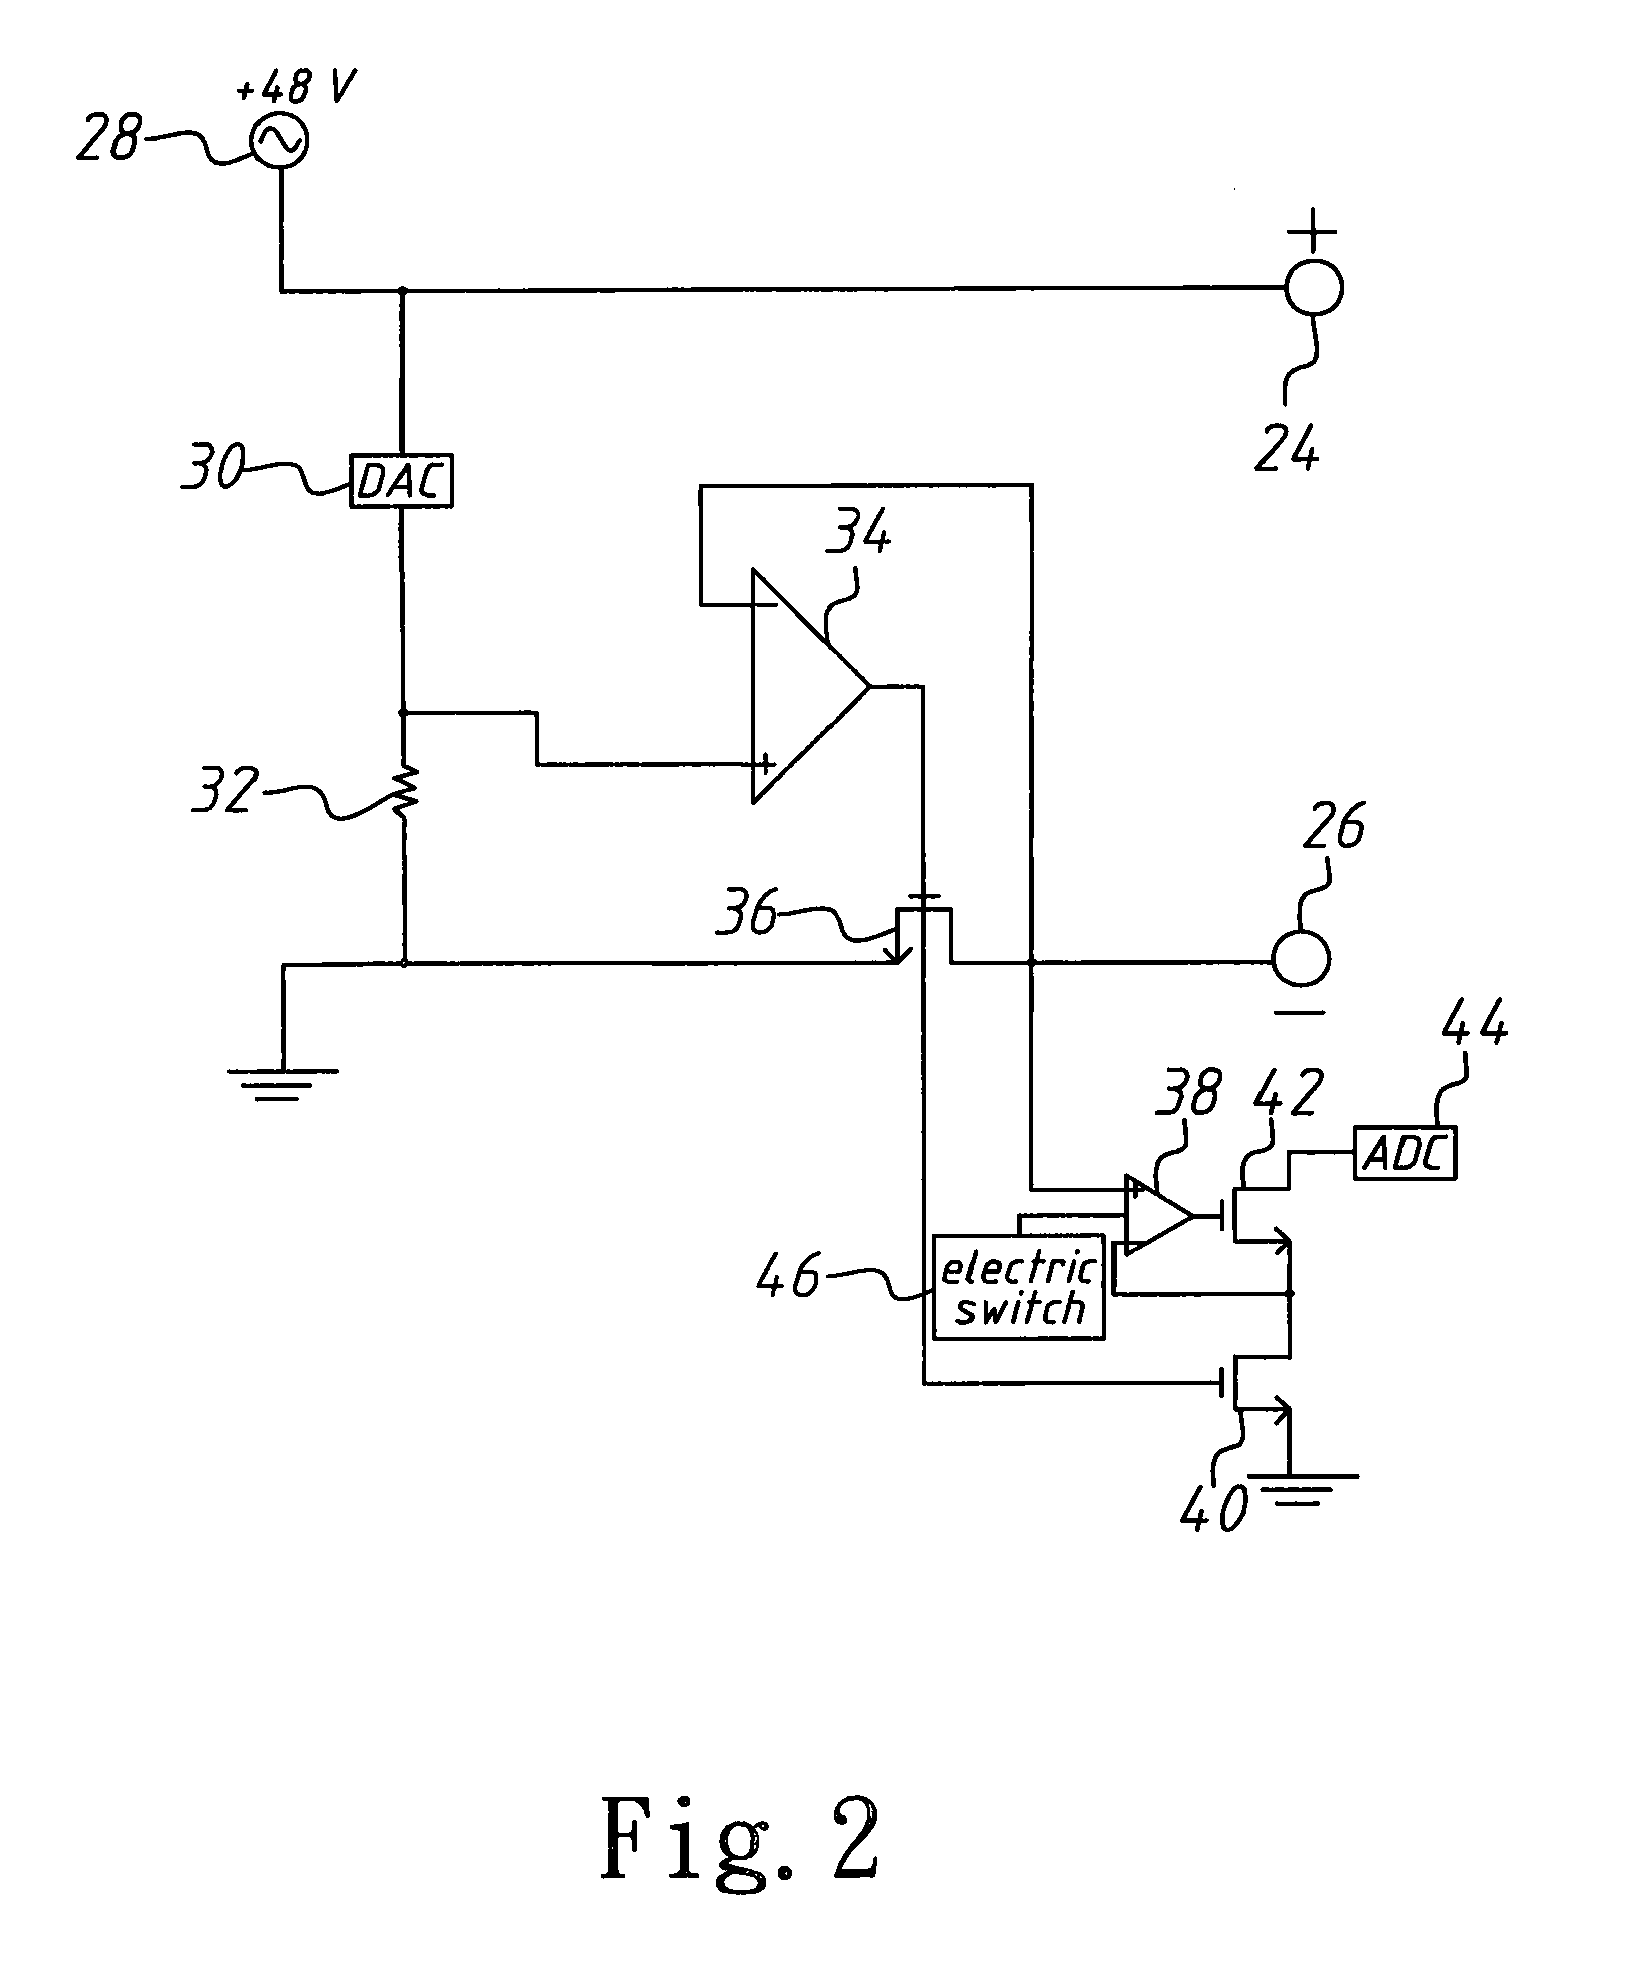 Control circuit for current detection